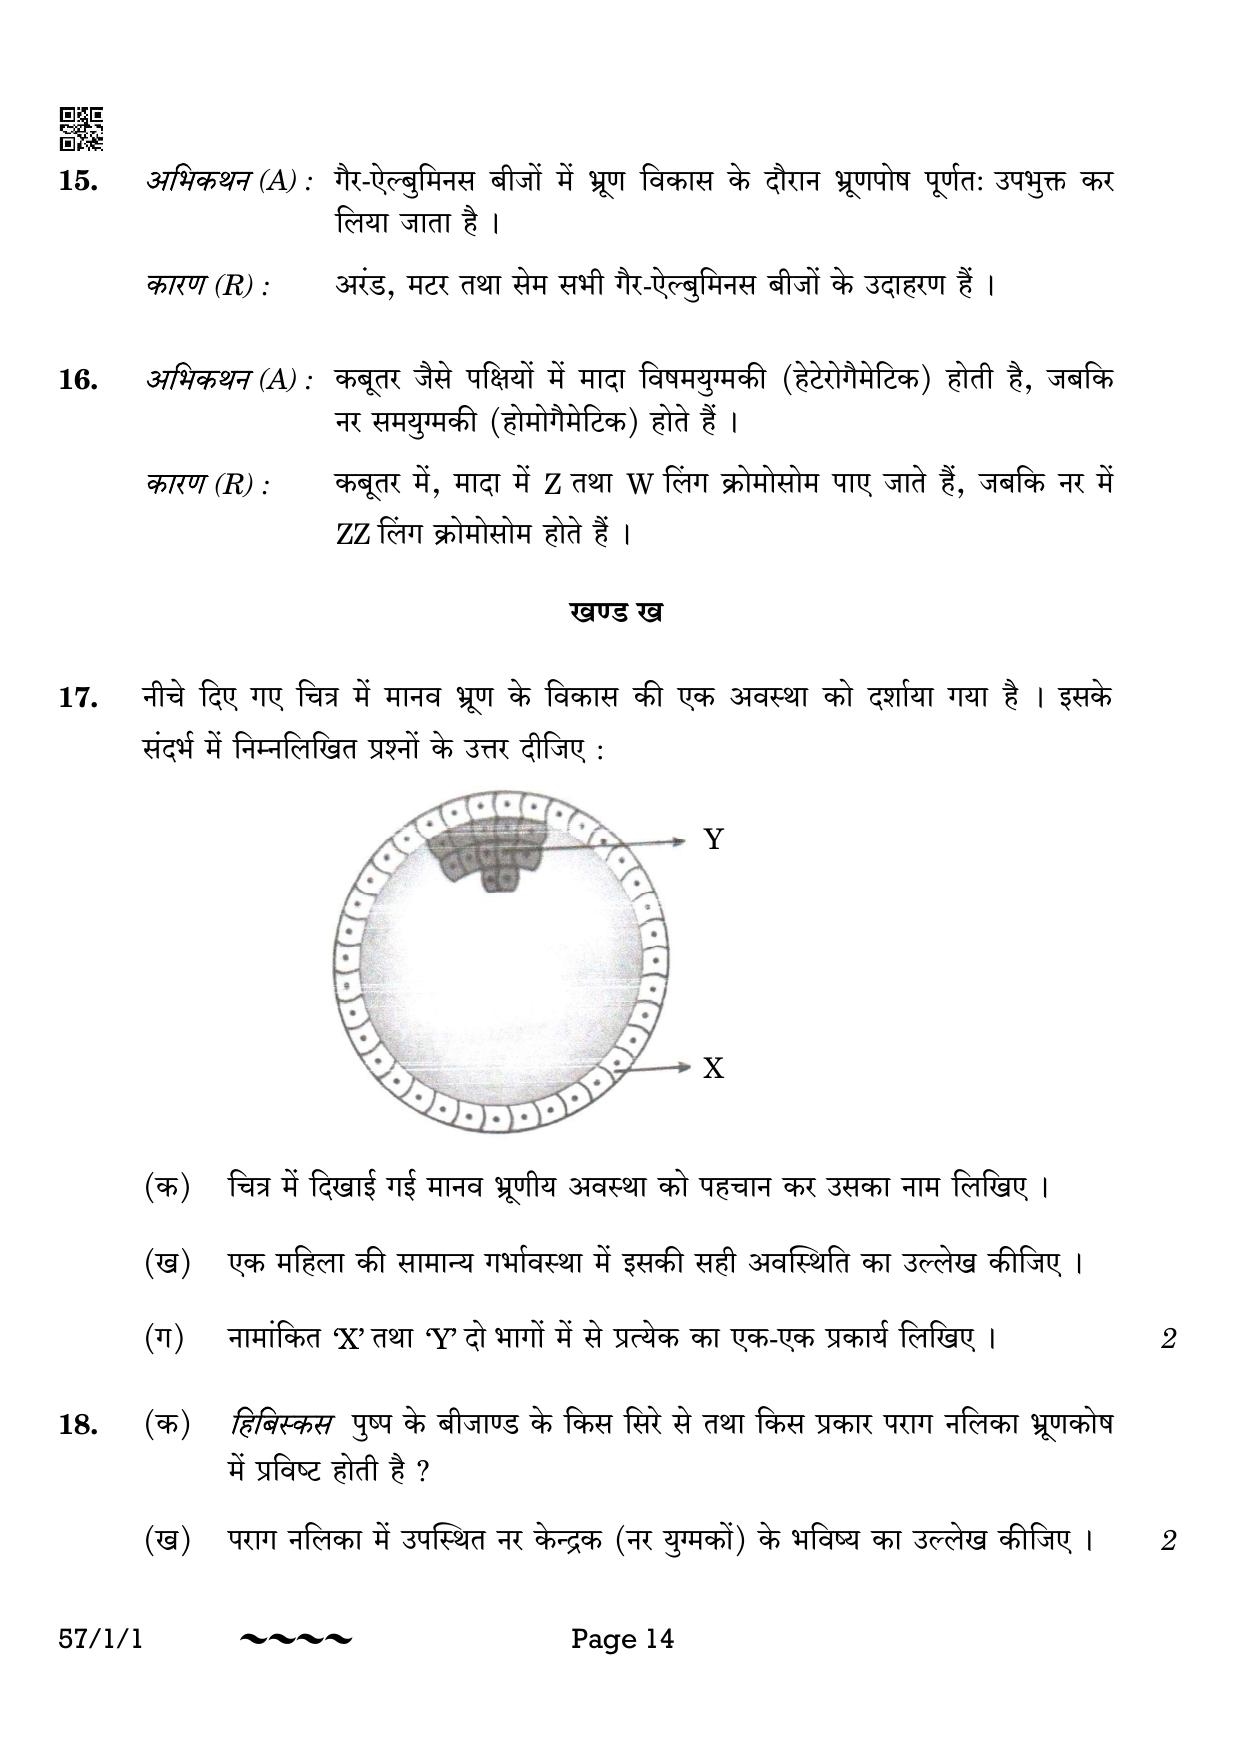 CBSE Class 12 57-1-1 Biology 2023 Question Paper - Page 14